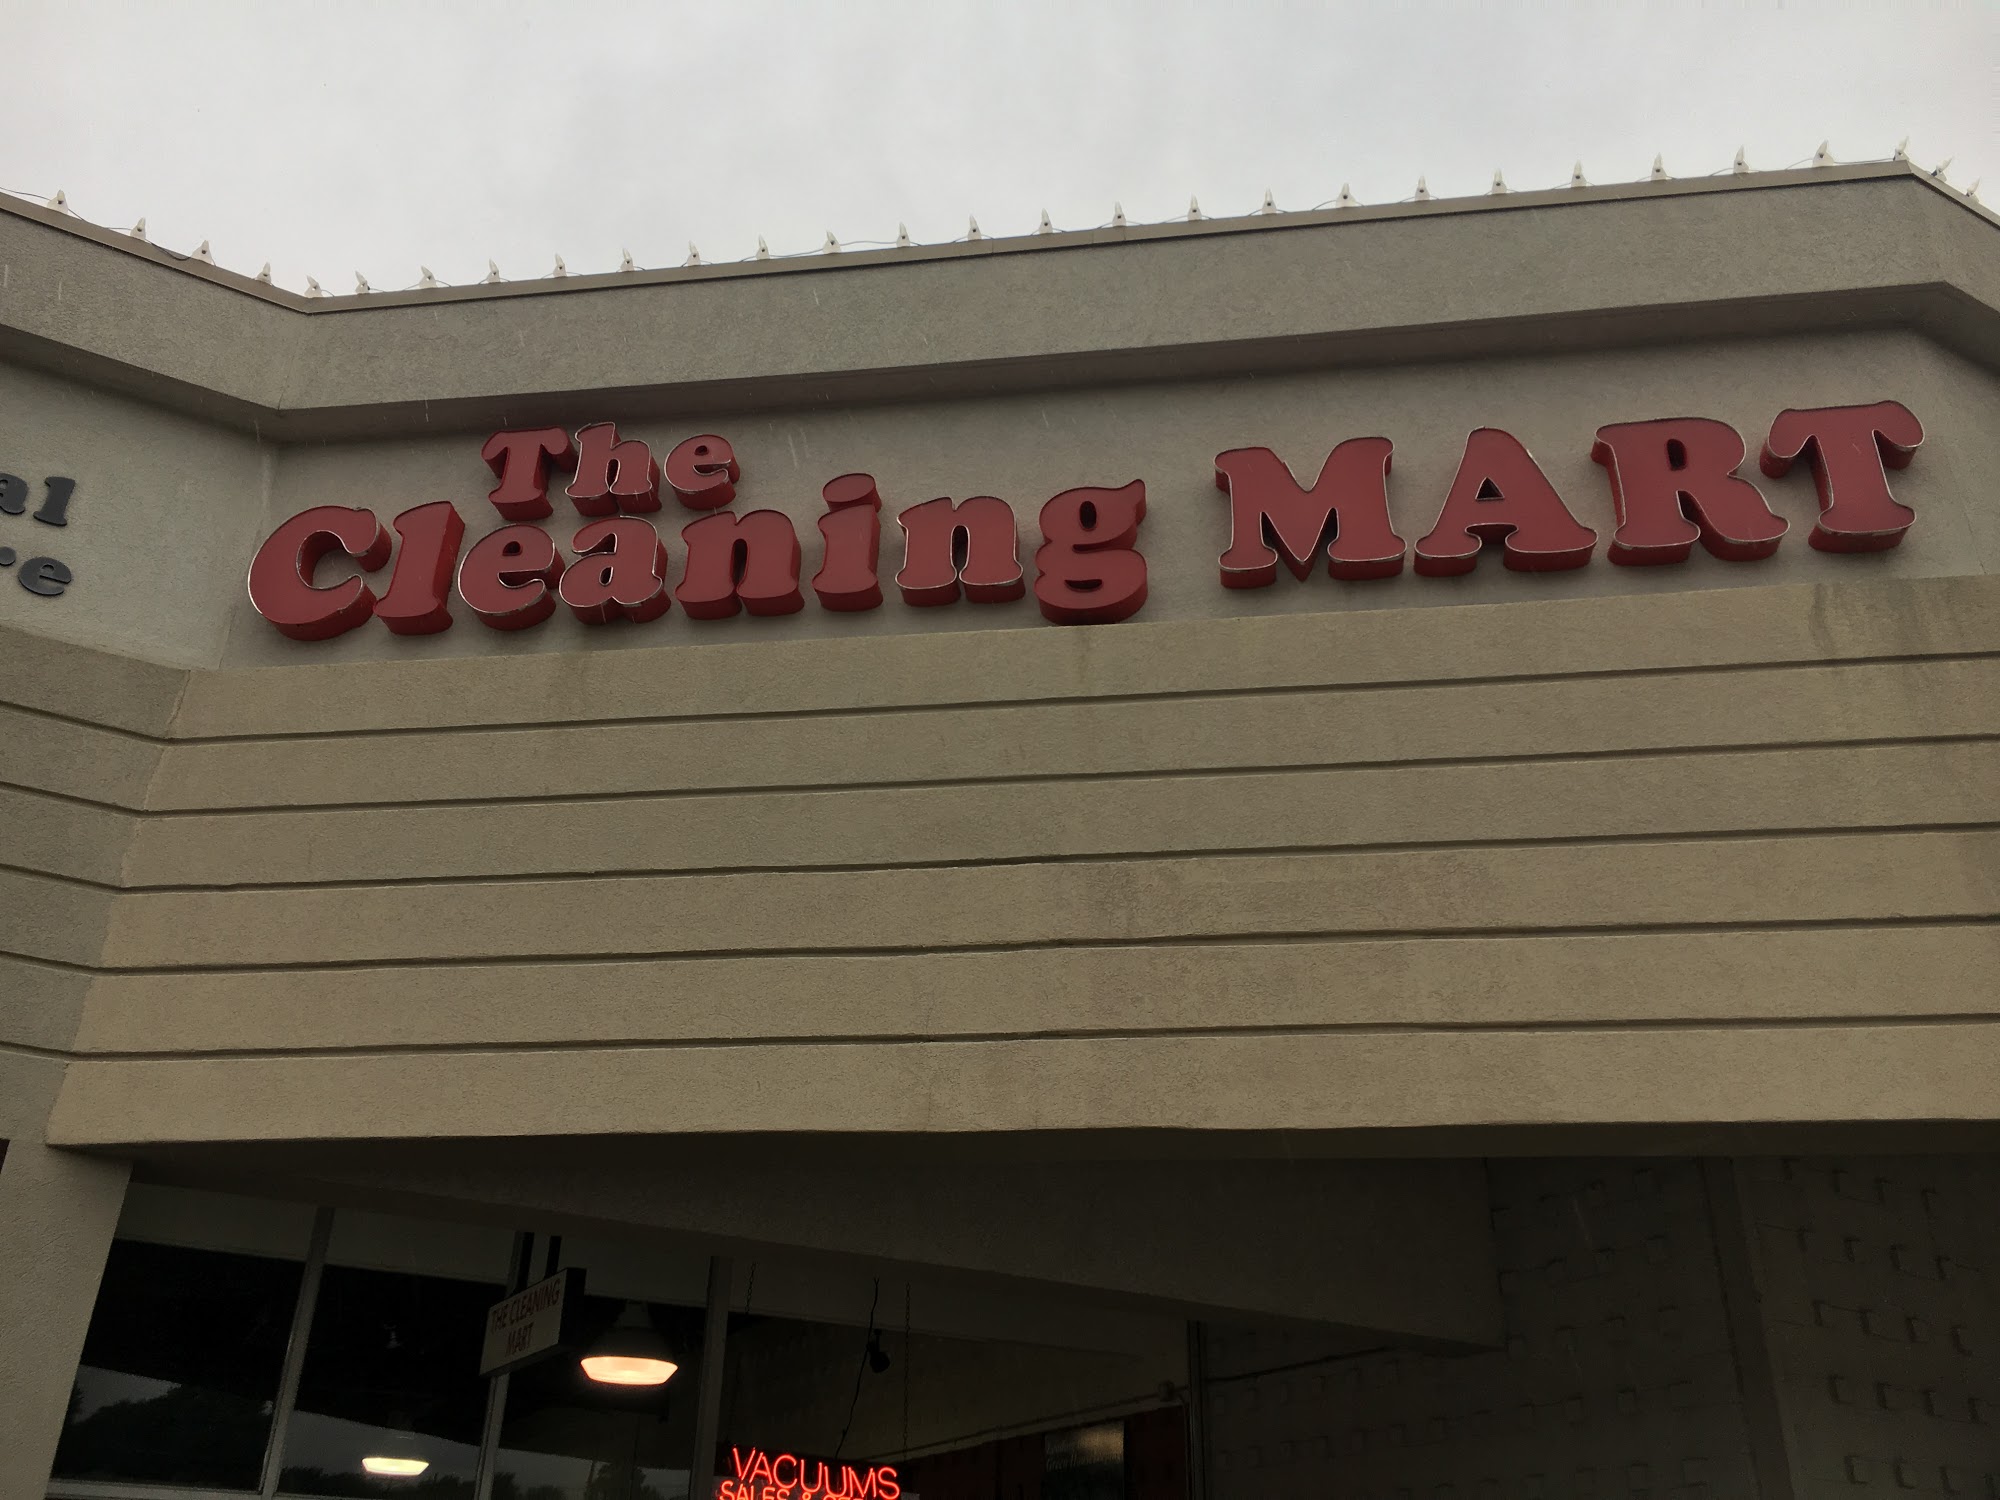 Cleaning Mart